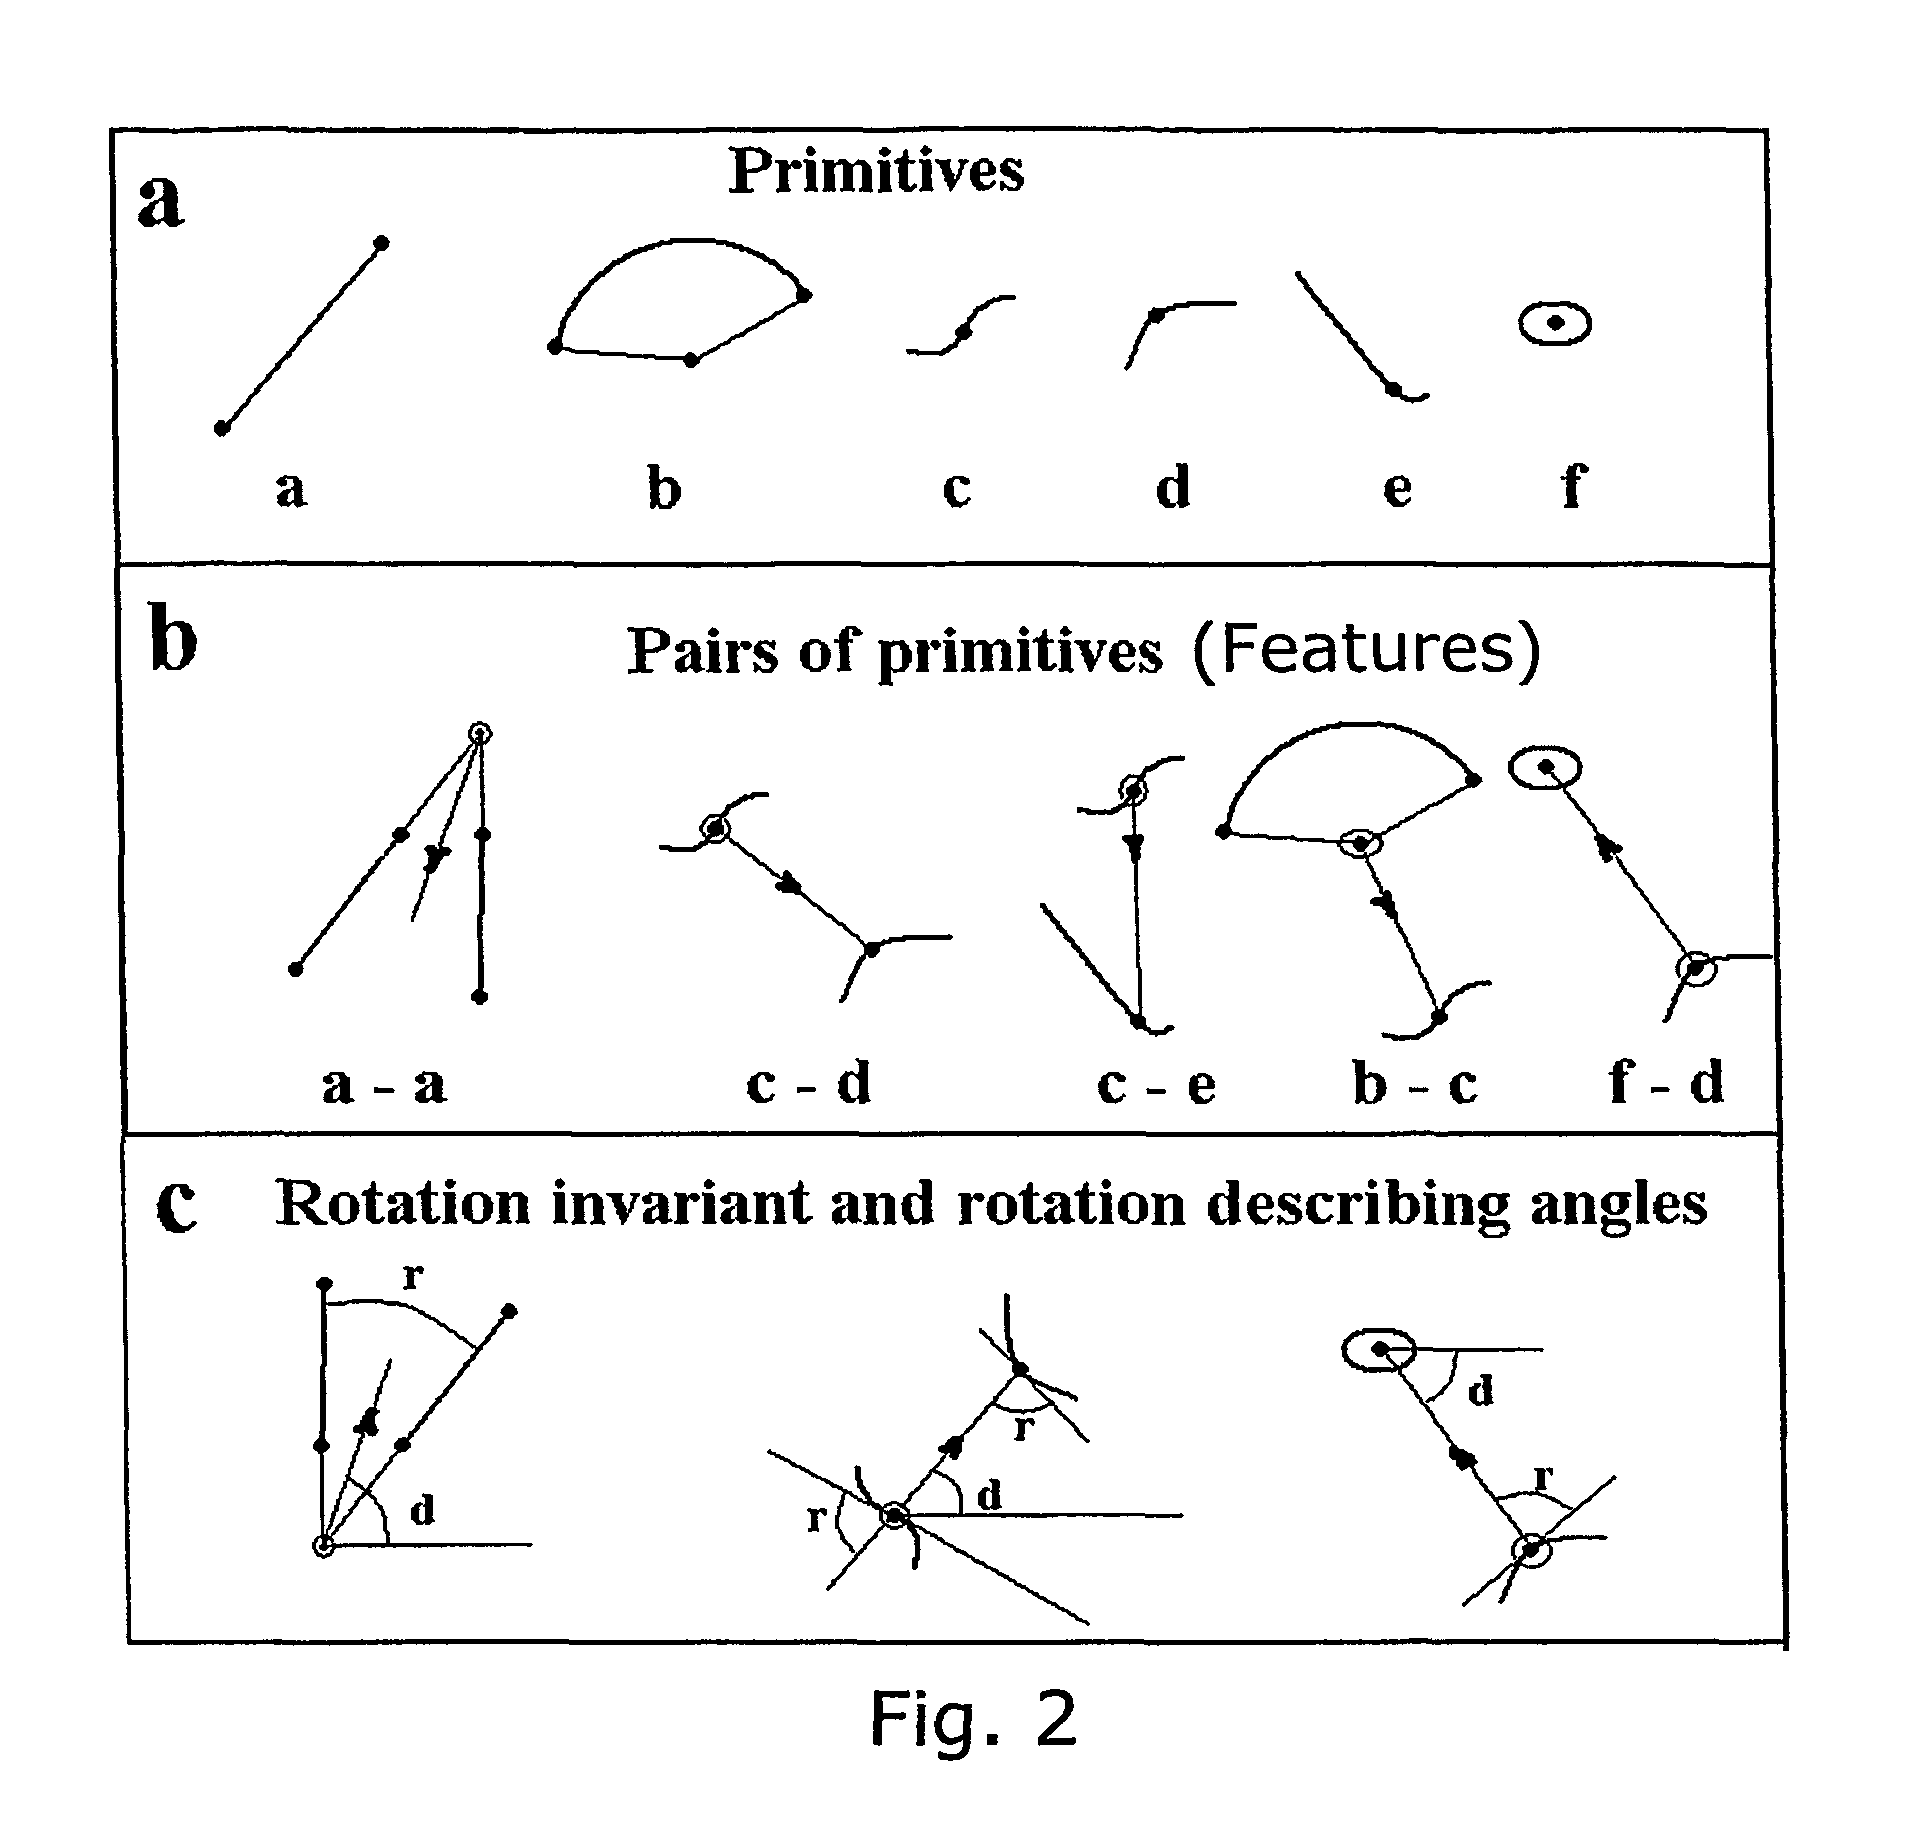 Computer-vision system for classification and spatial localization of bounded 3D-objects